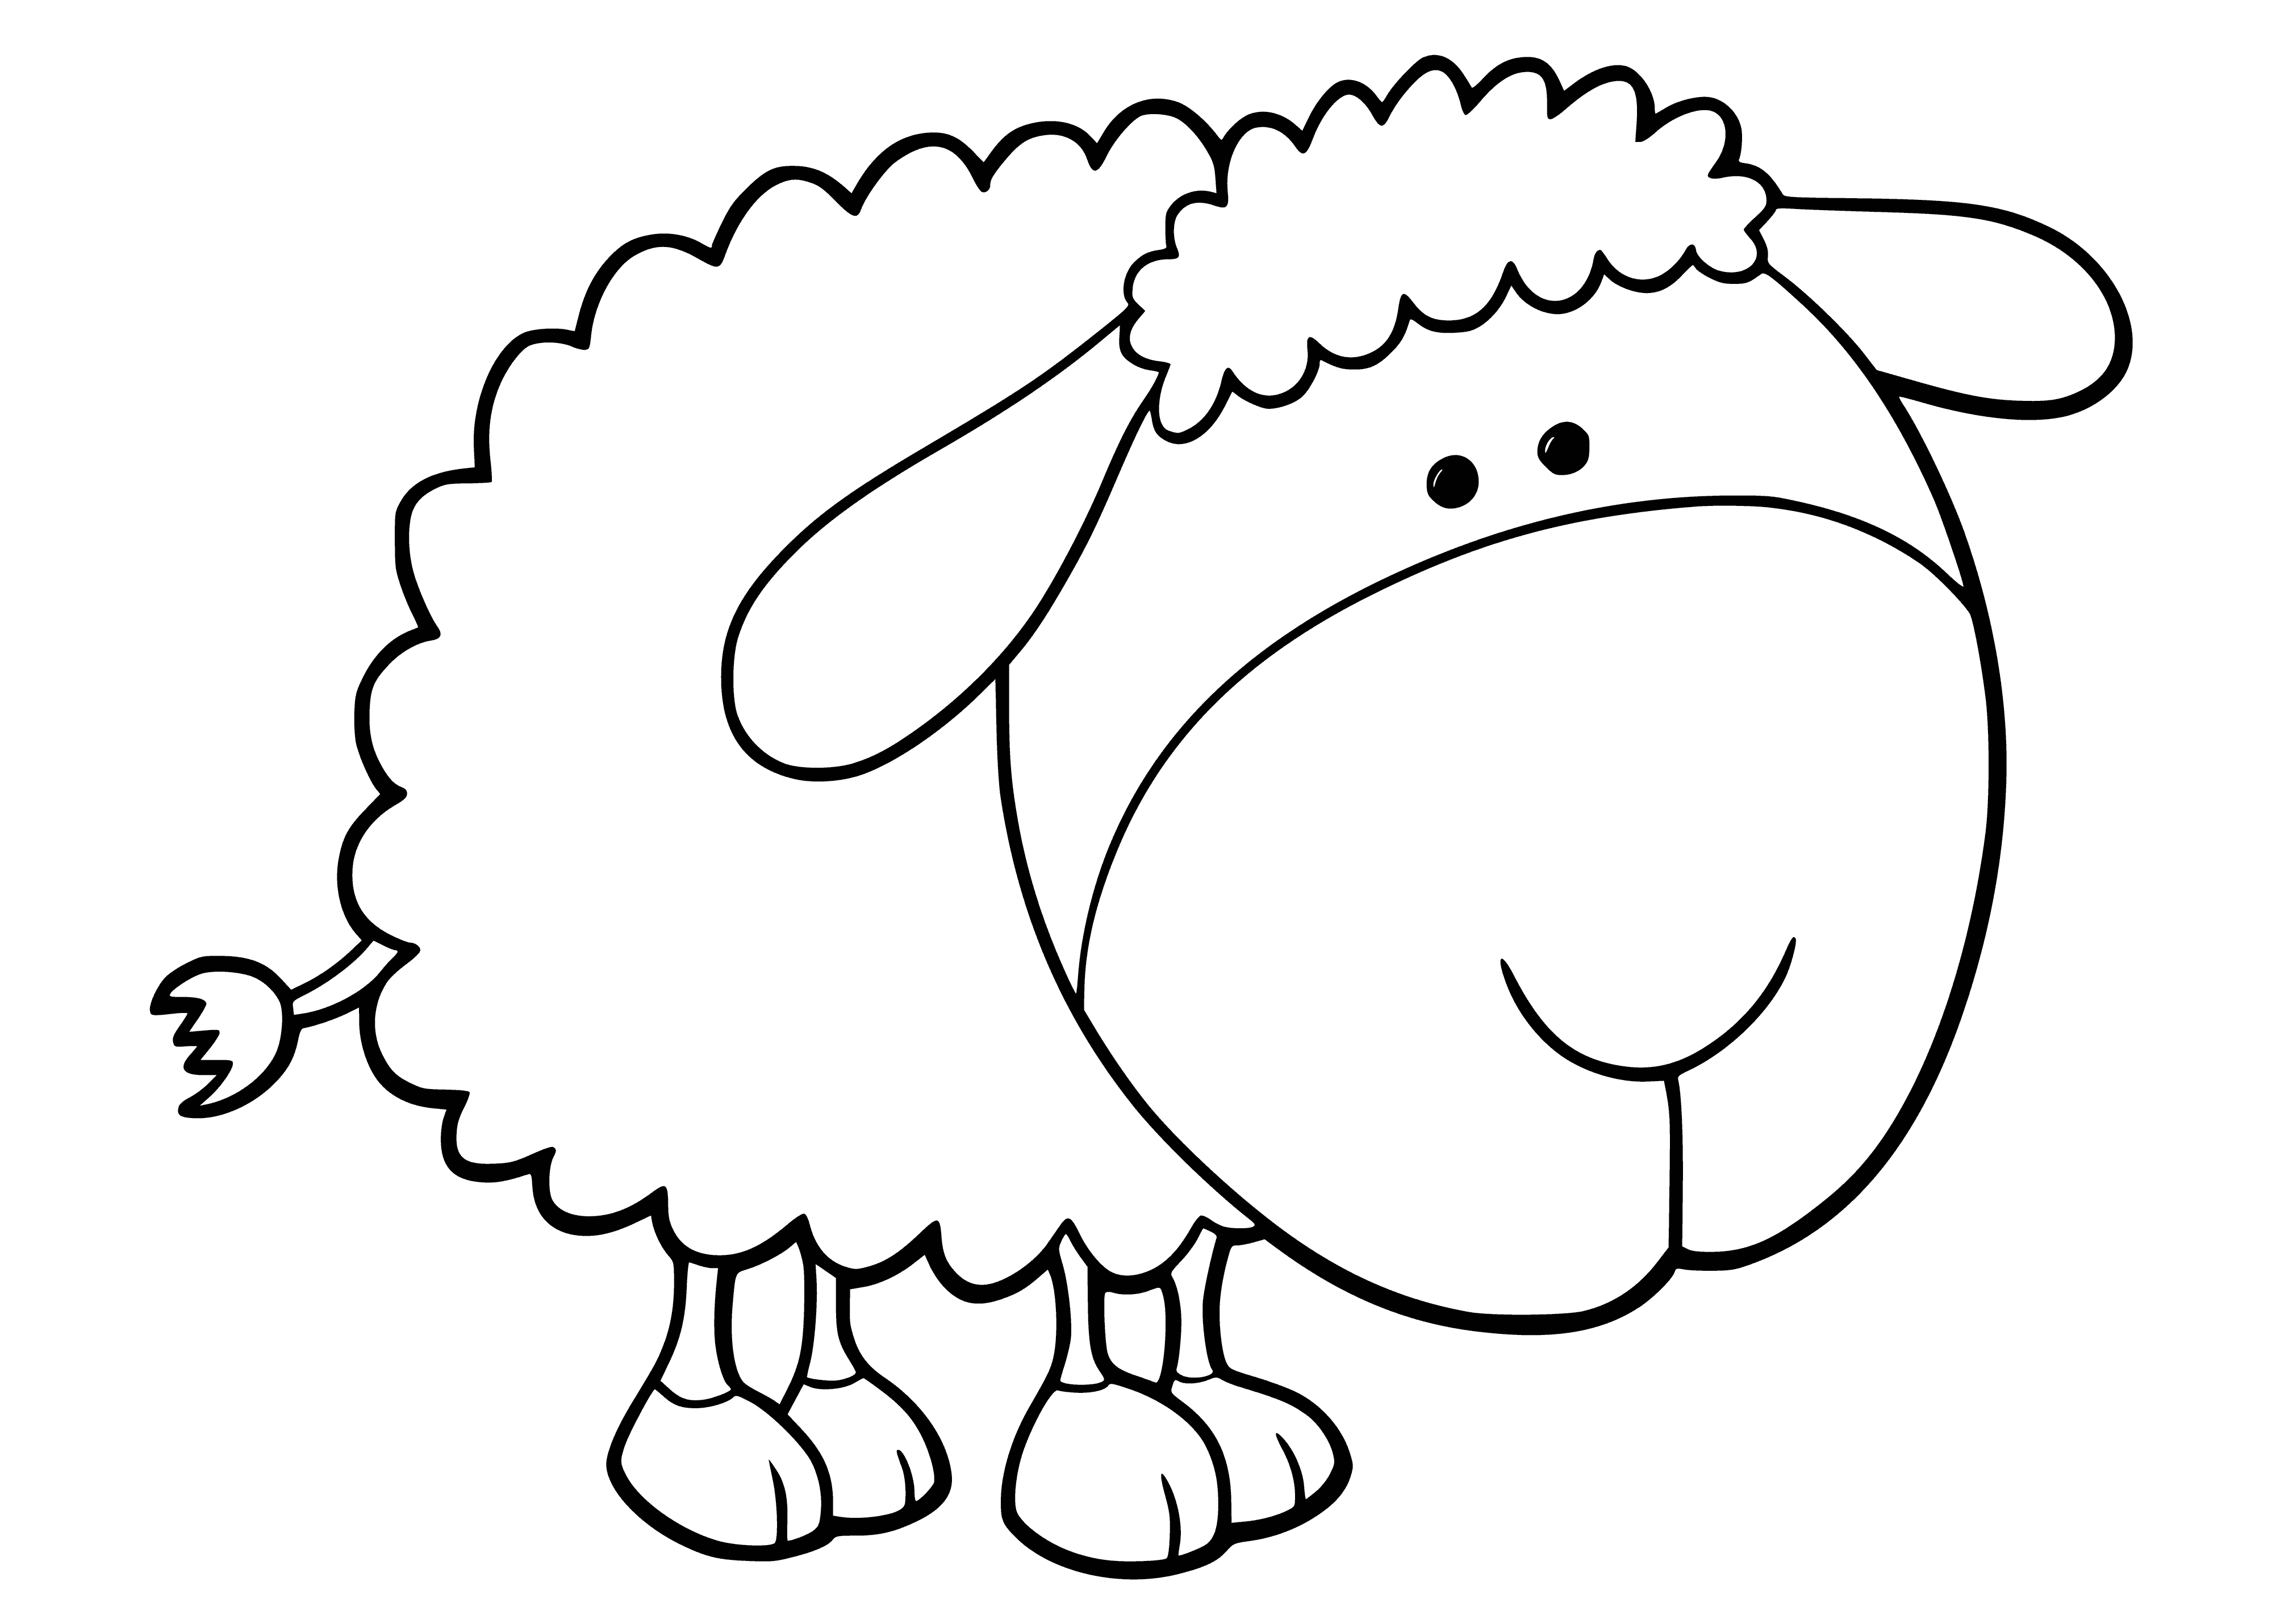 coloring page: Toy sheep on side, white fur & black face, eyes closed, legs straight.